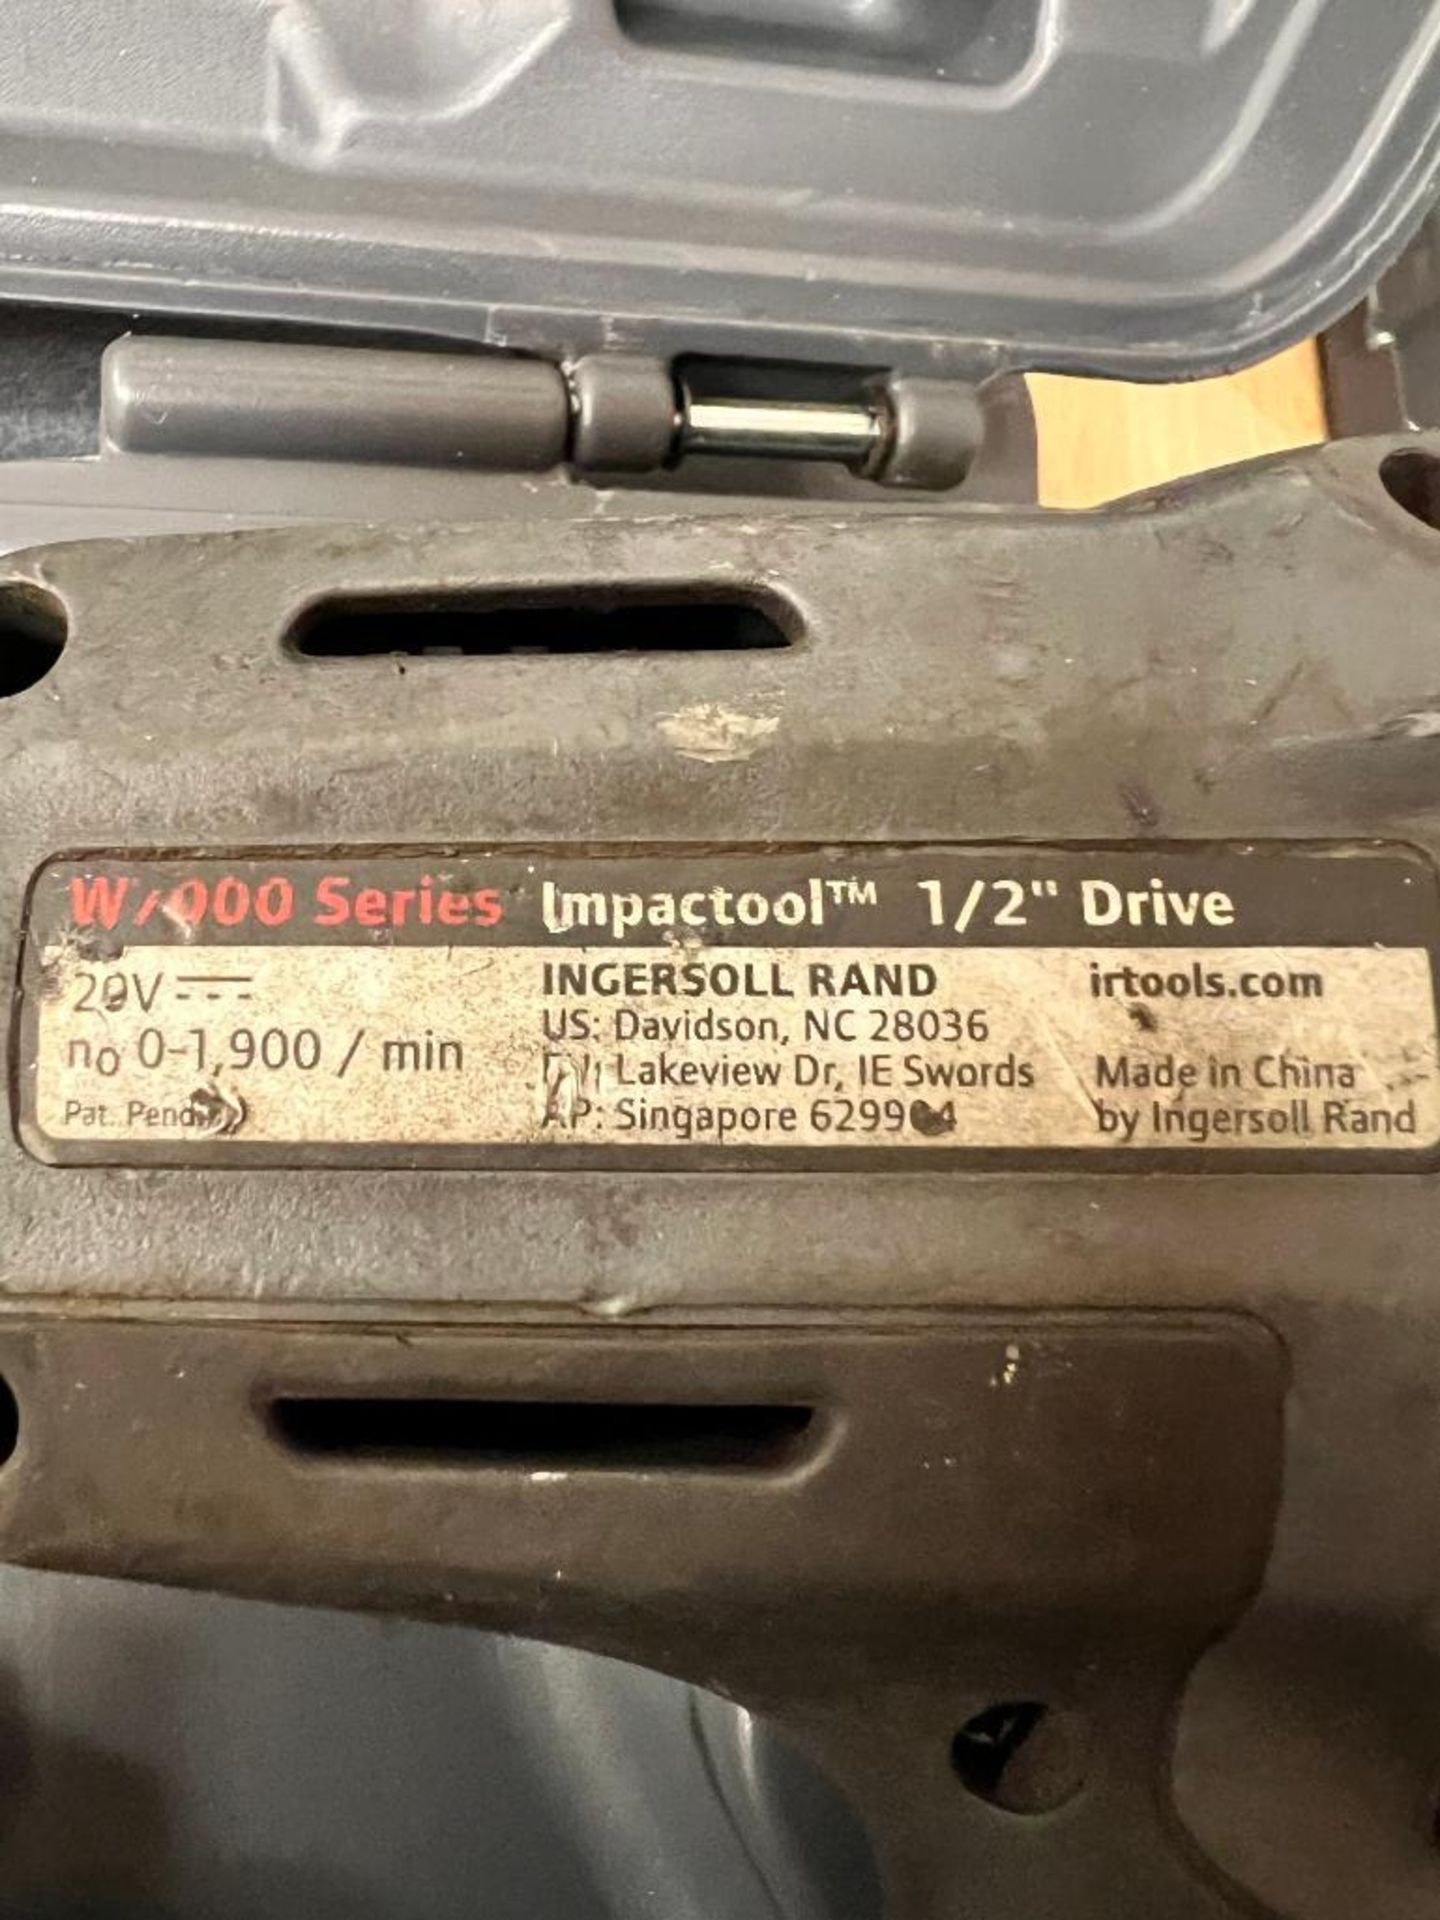 Ingersoll Rand 1/2" Drive Impact W7000 Series, 20V, Includes (2) Batteries & Charger - Image 2 of 2